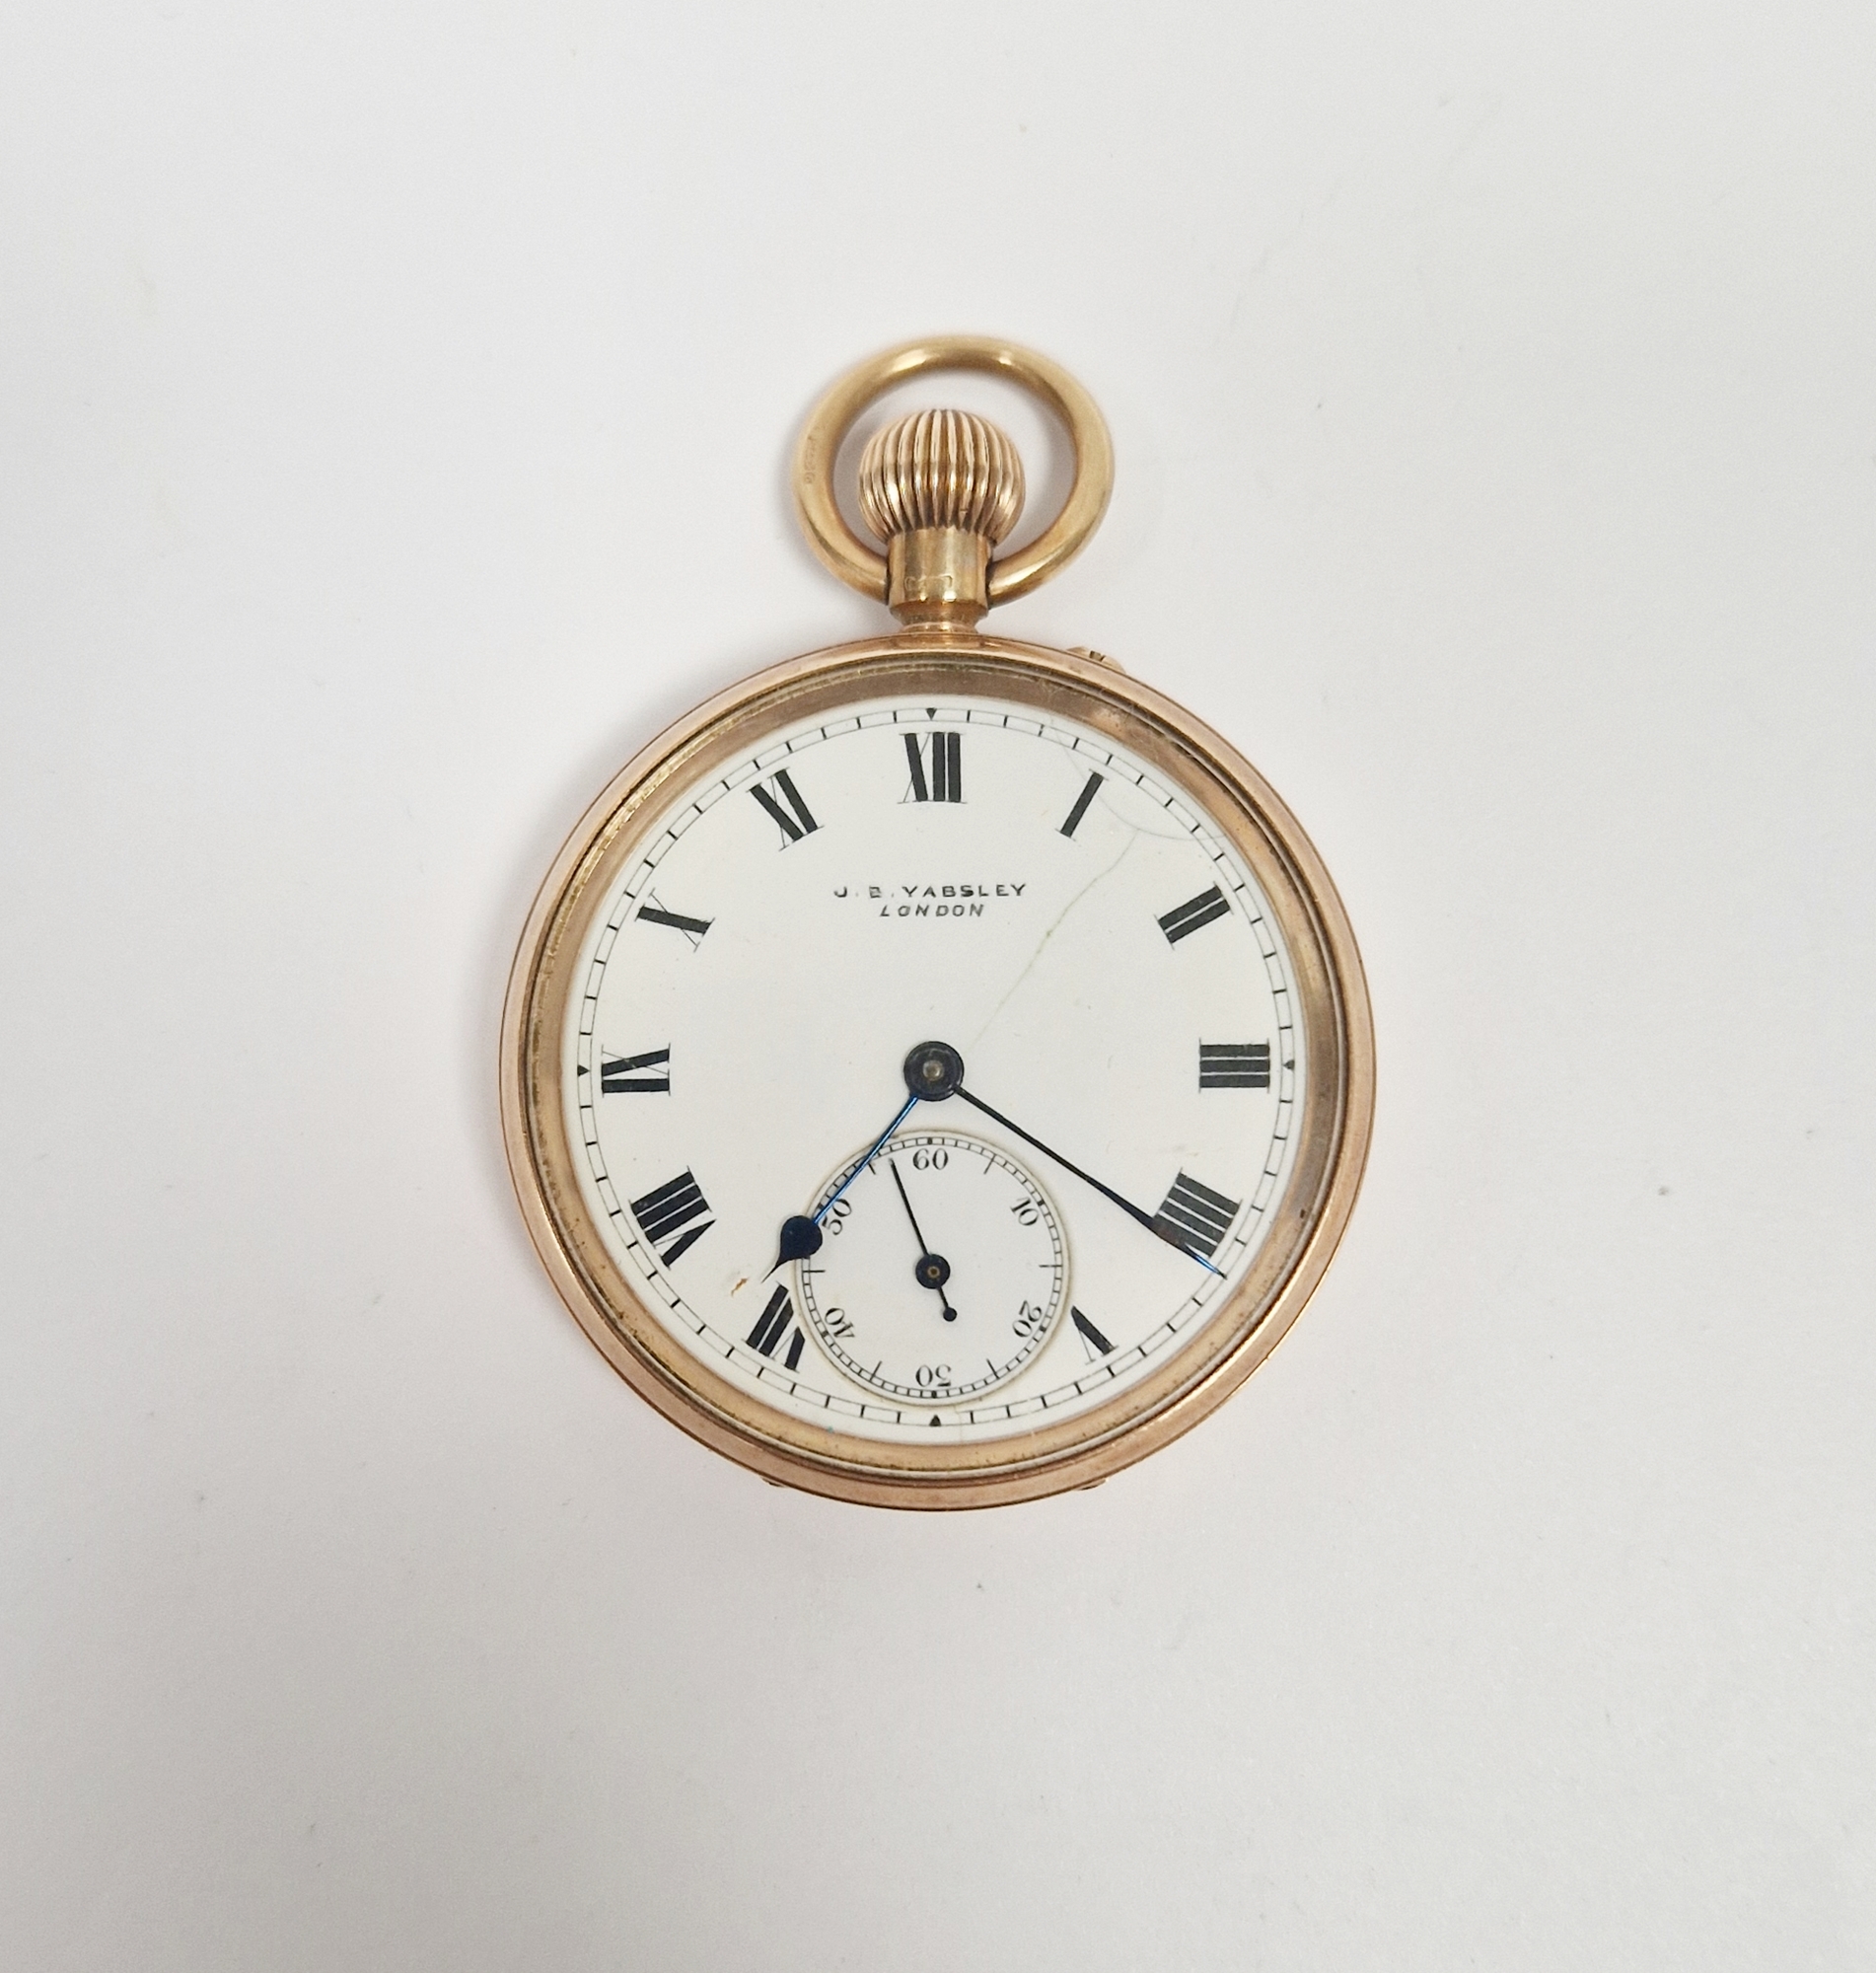 Early 20th century 9ct rose gold open faced pocket watch by J B Yabsley, the enamel dial having